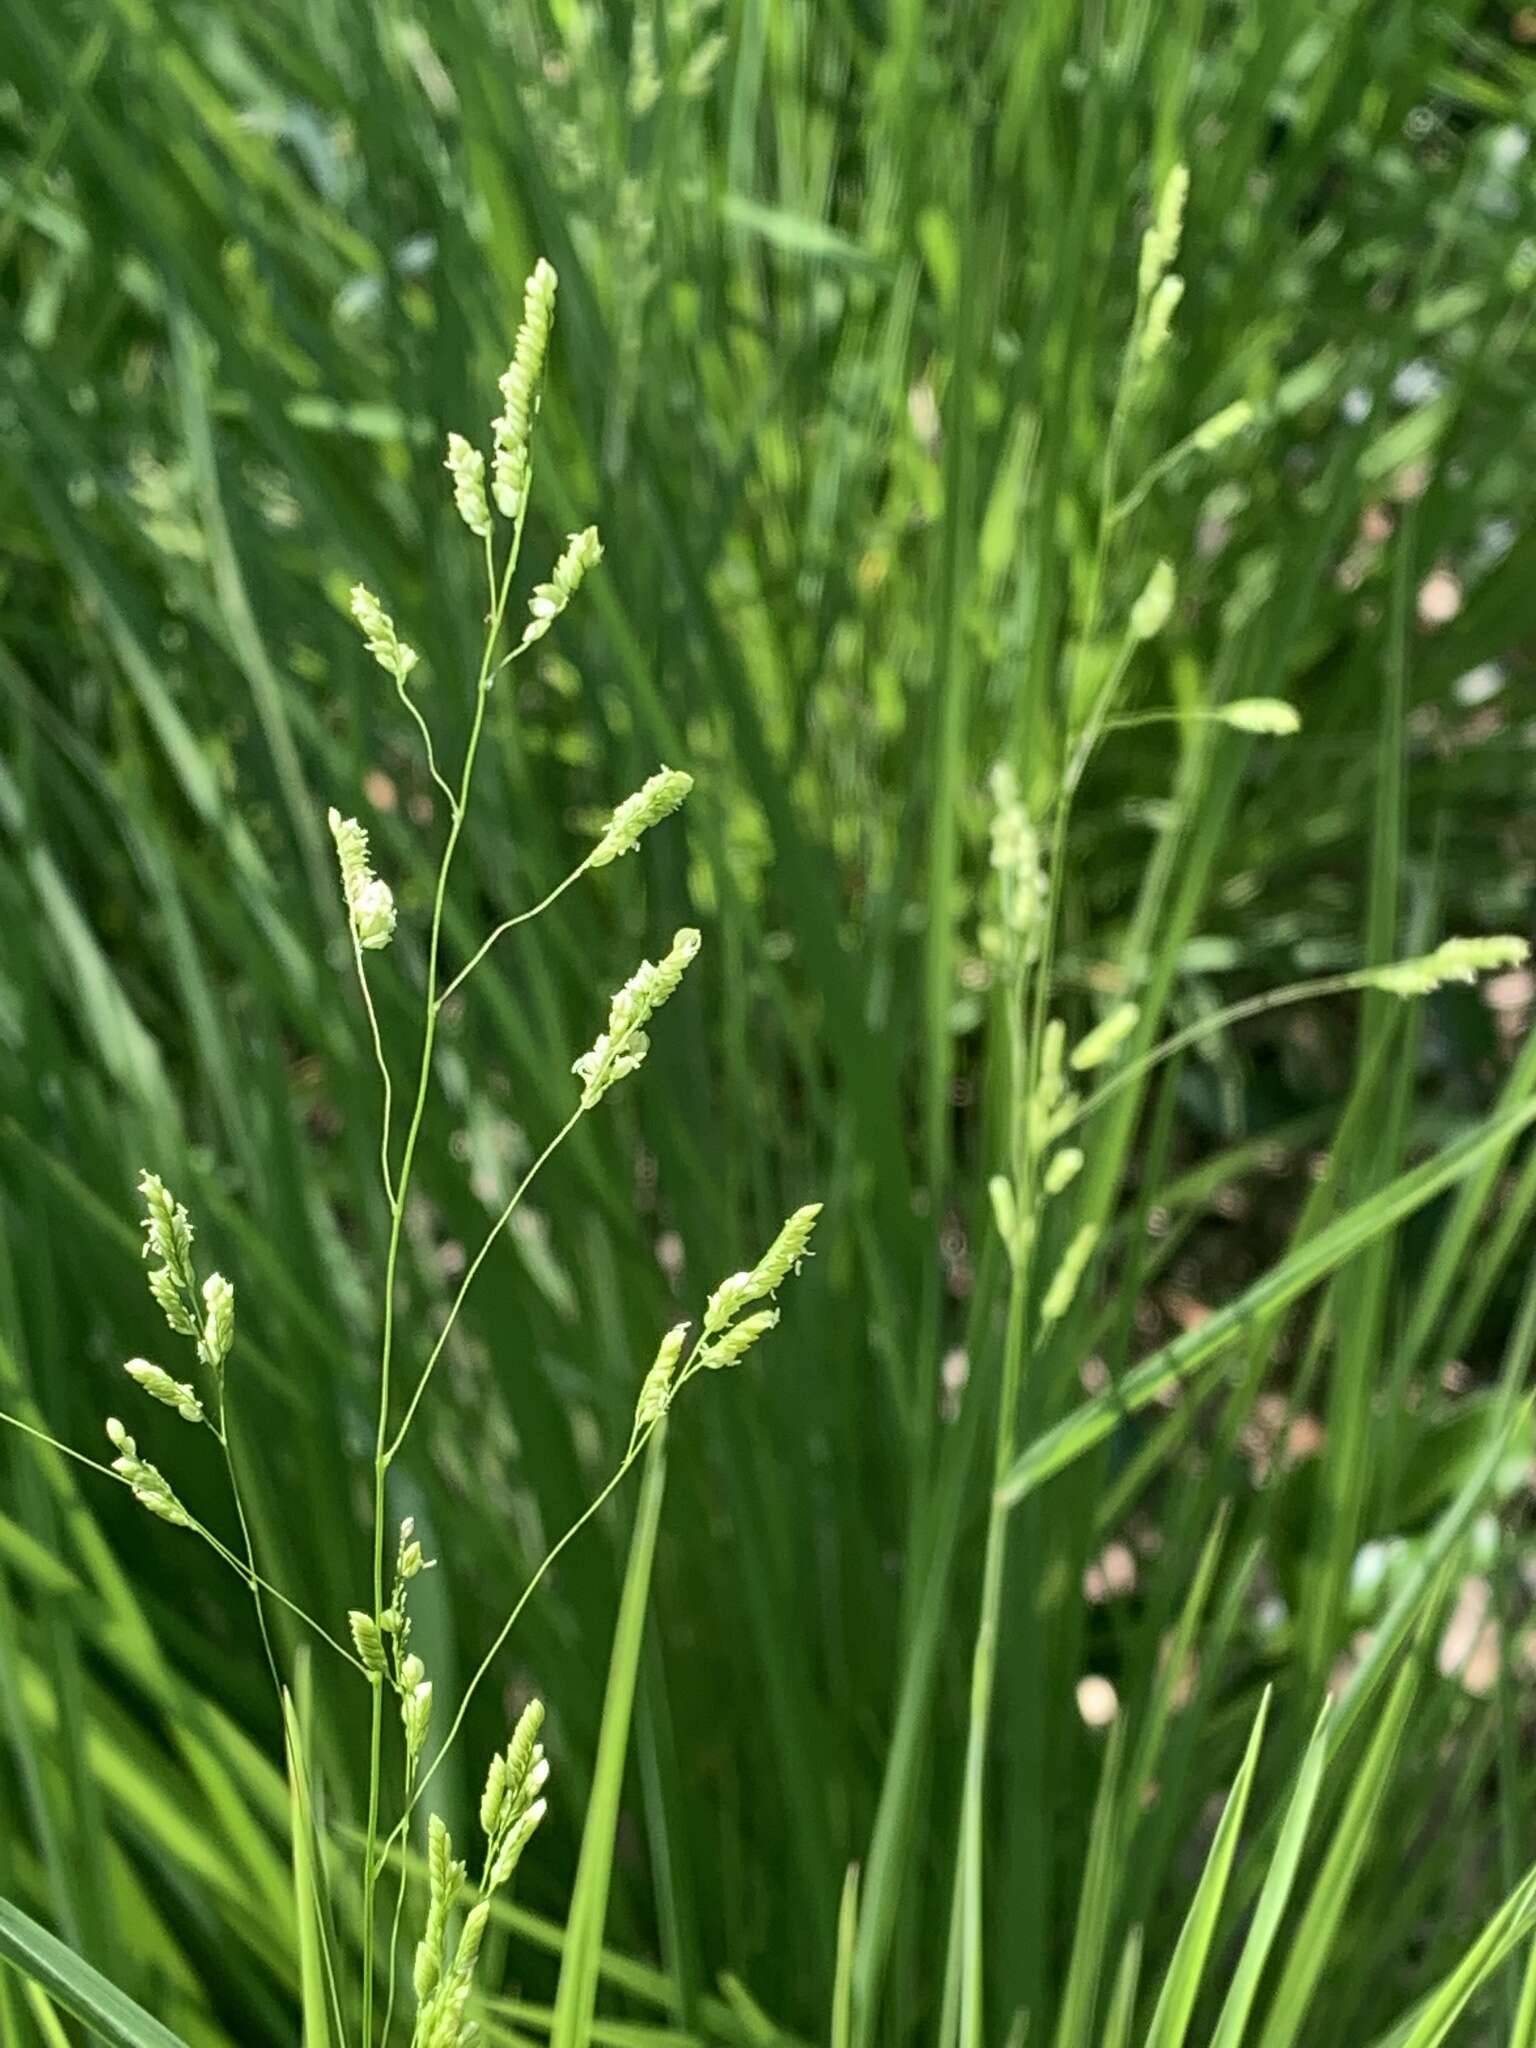 Image of bunch cutgrass